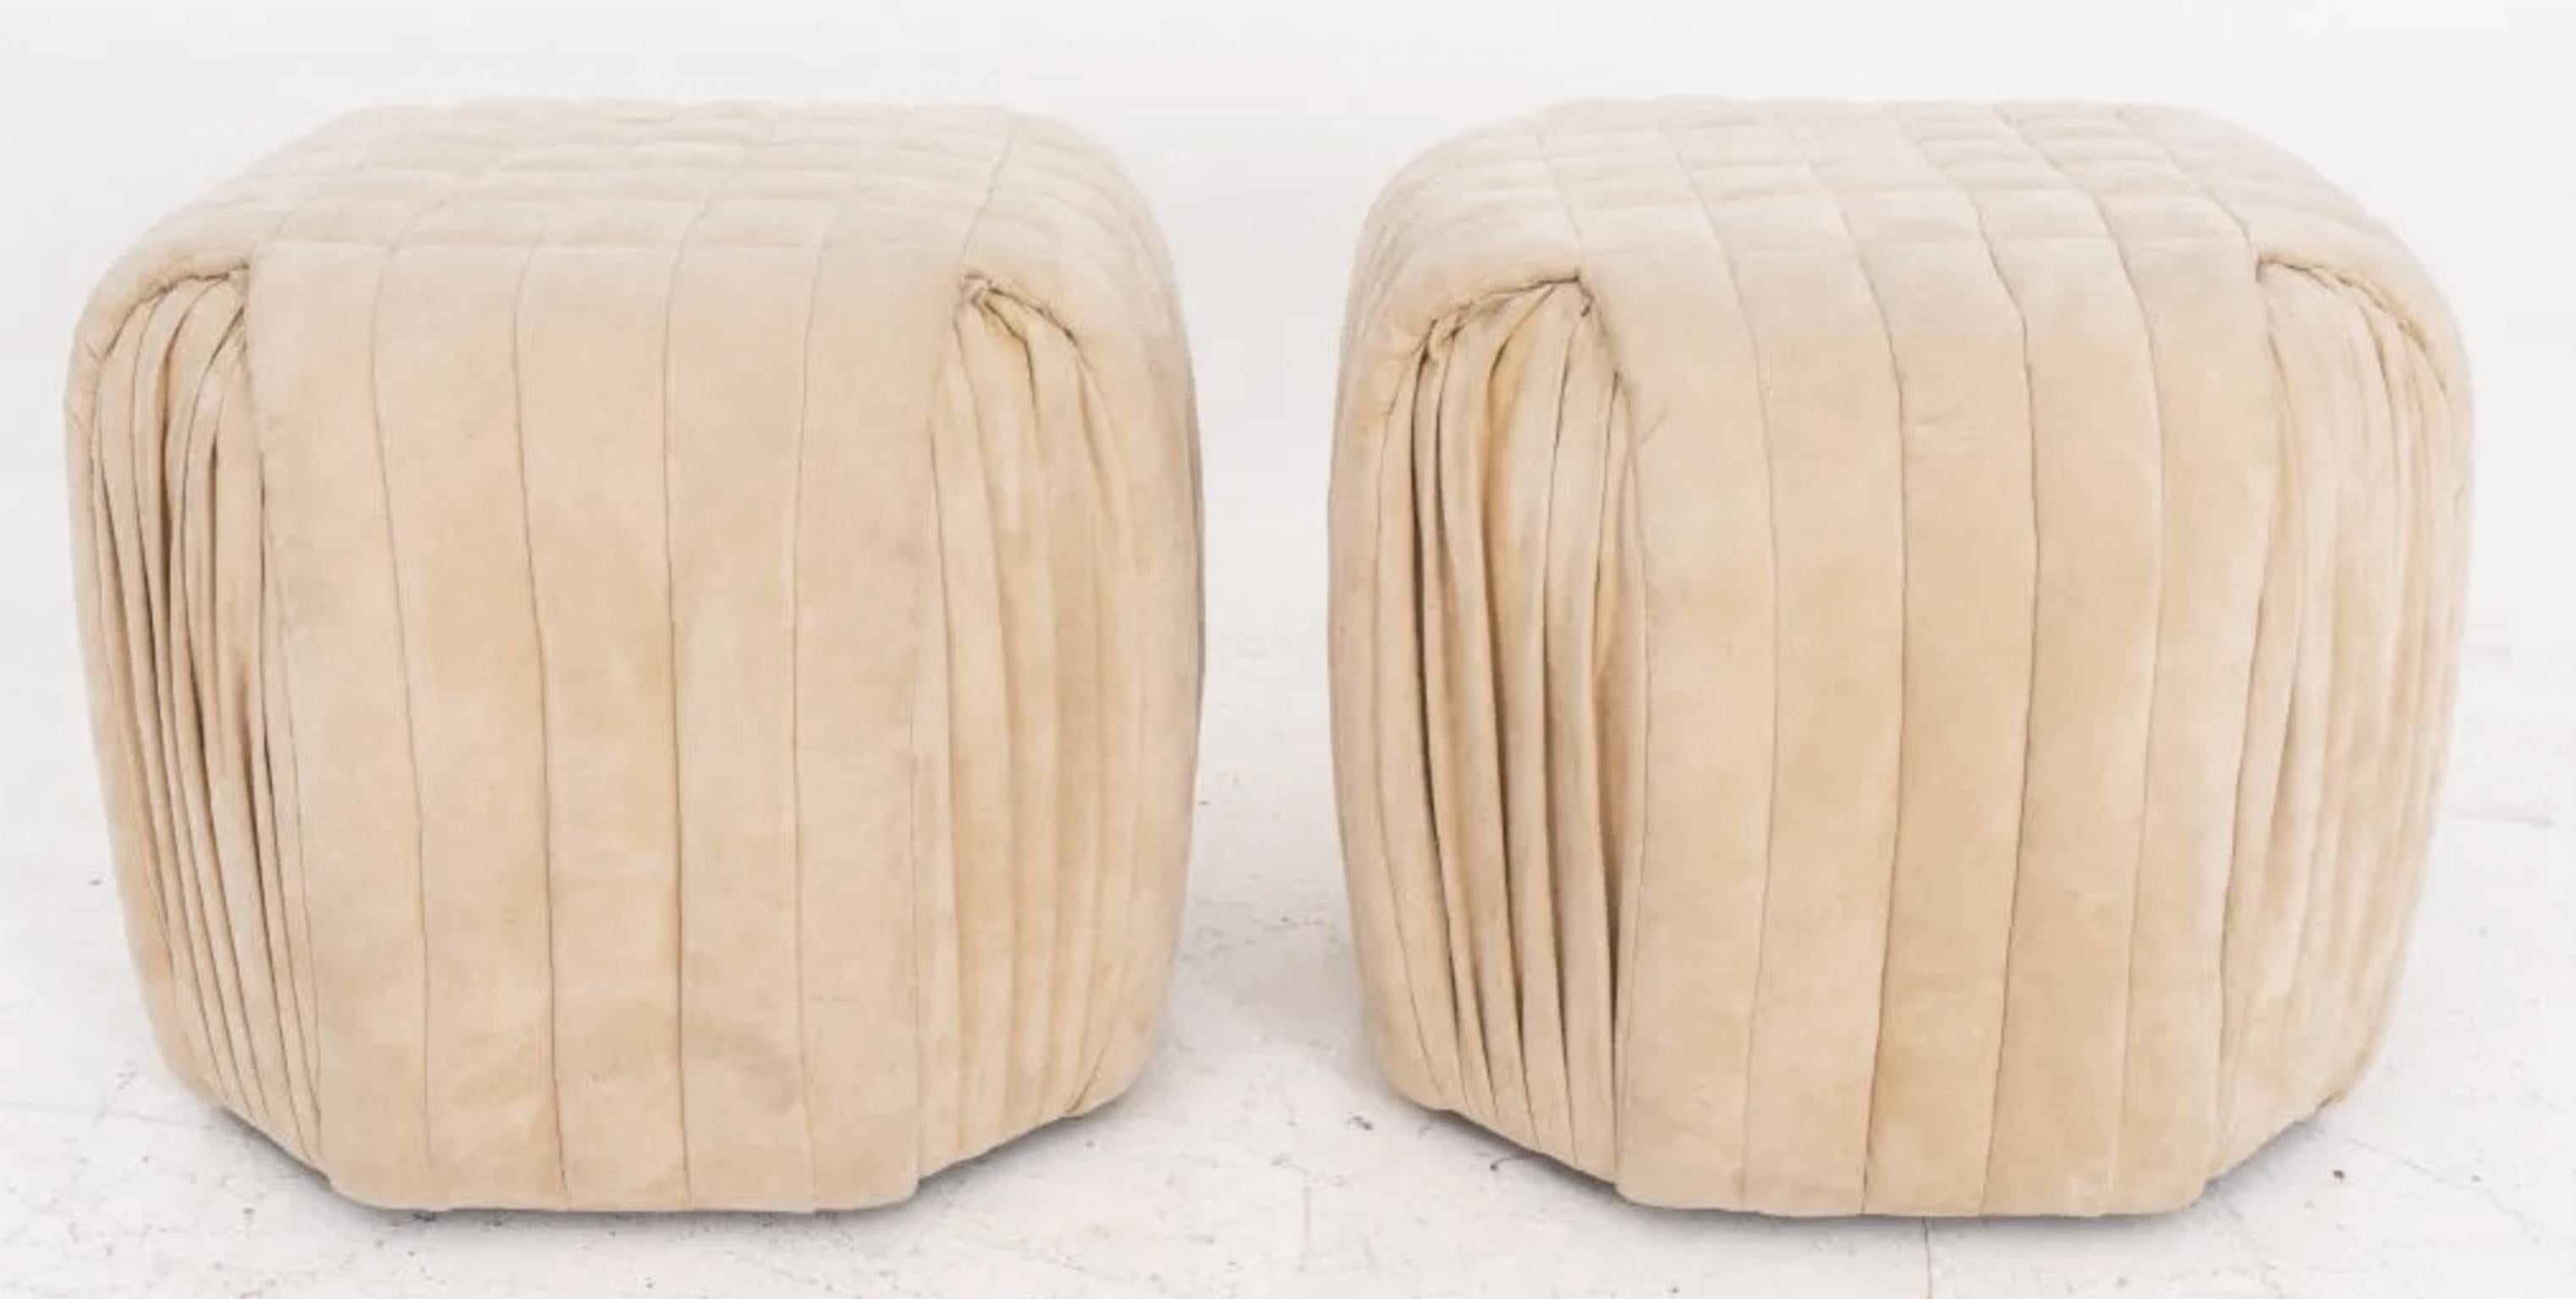 Pair Geometric pleated Mid-Century Modern Beige Suede poufs ottomans or stools. Soft Suede Pleated stools. Great light tan Beige in color. Circa 1970s In the Style of De Sede. No Labels or Marks. Located In Brooklyn NYC.

Sold as a Pair of (2